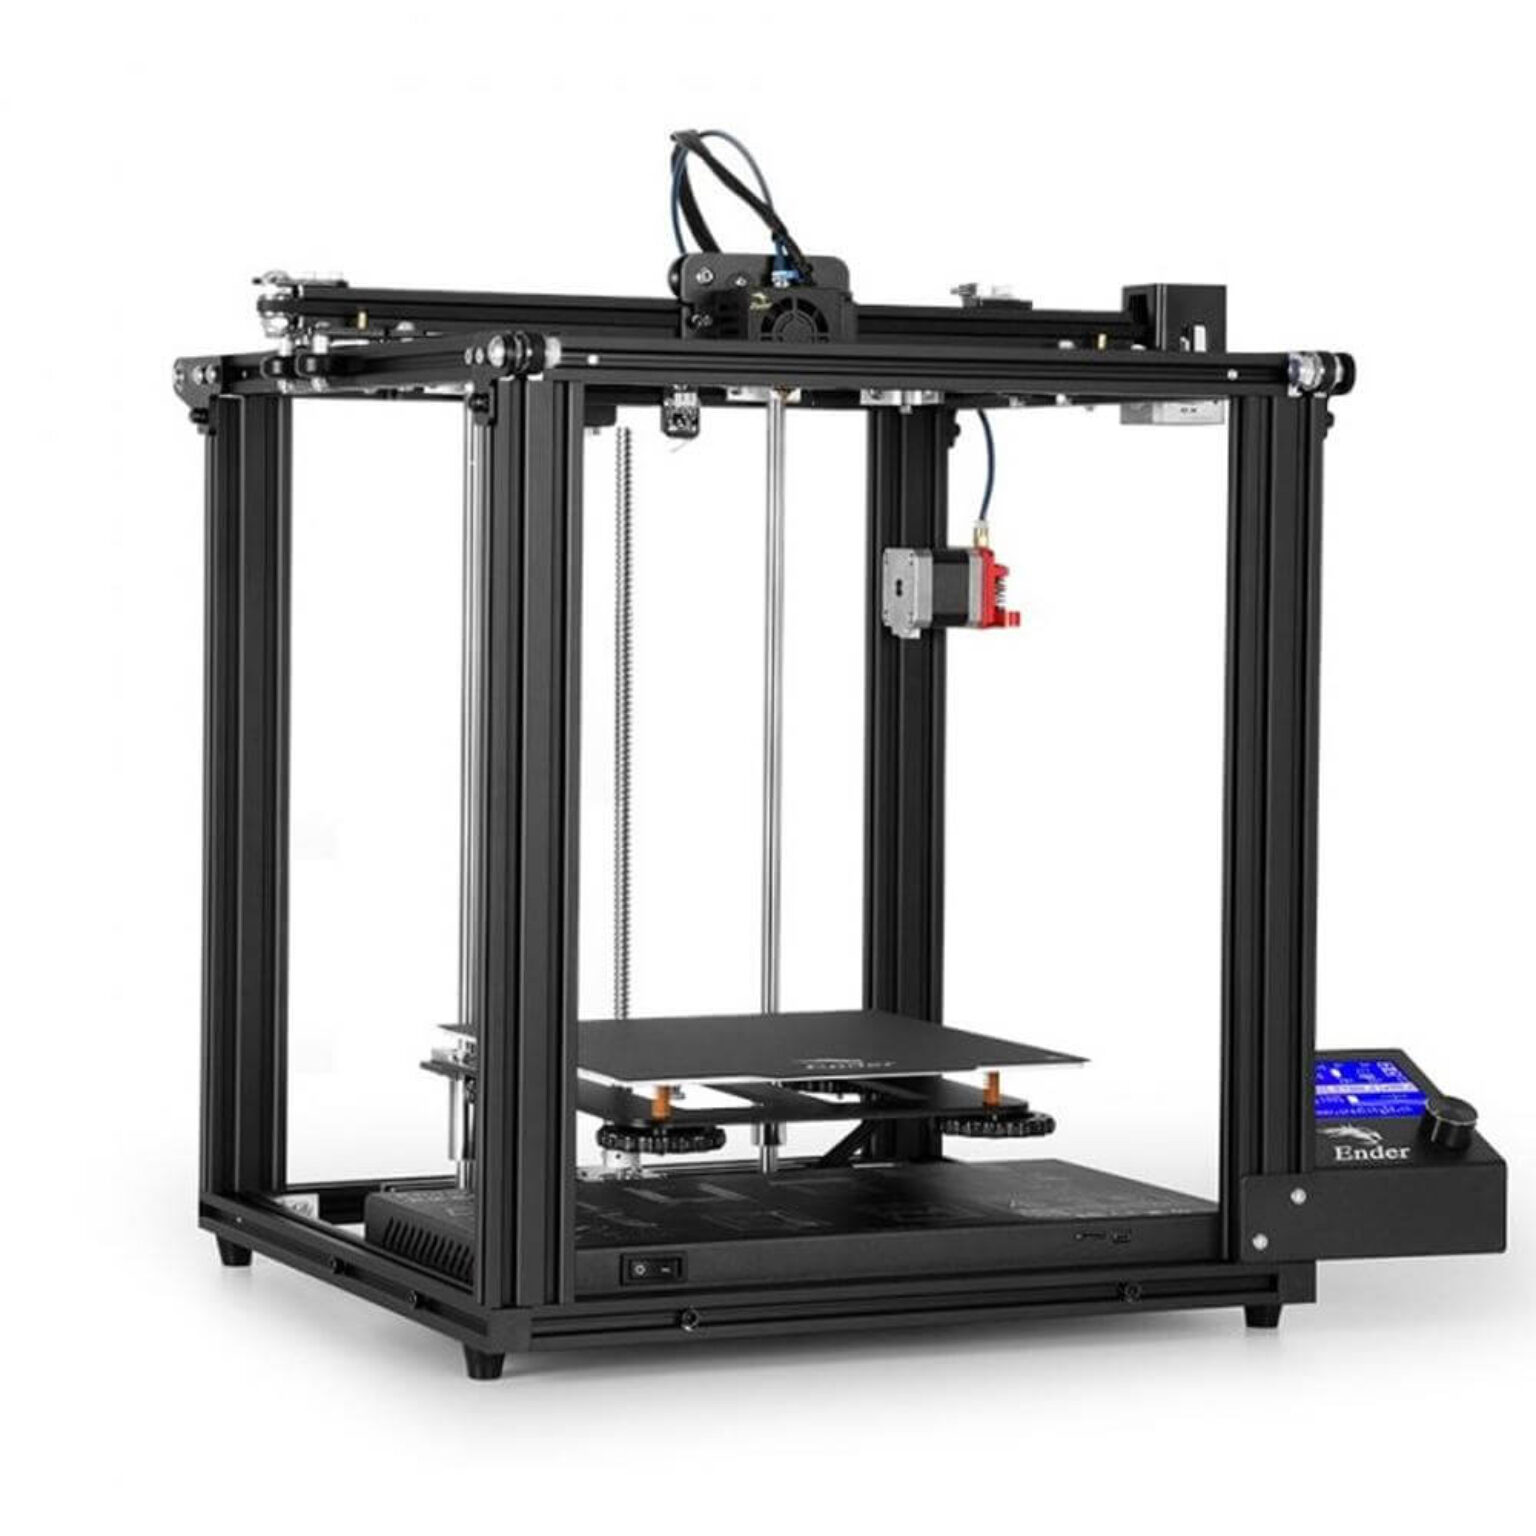 Top 7 Creality 3D Printers Types, Uses And Buying Guide Pick 3D Printer